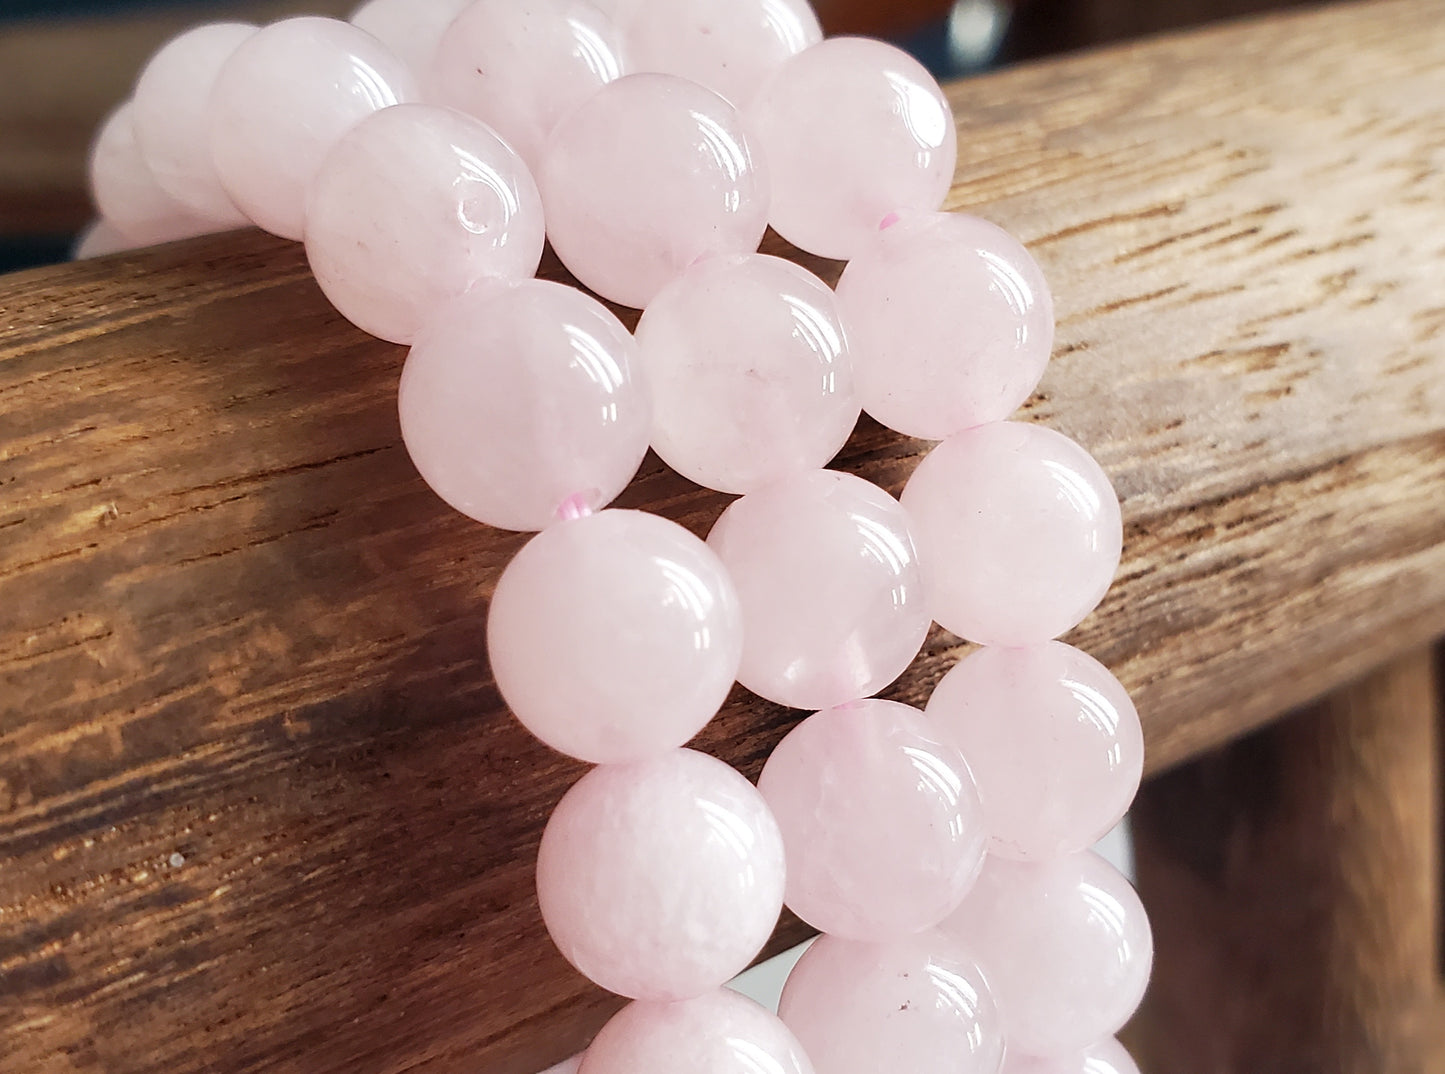 Rose Quartz Bracelet featuring 8mm beads on stretchy string for a 7-inch wrist. They are a soft pink. A blend of elegance and mysticism, radiating the soothing energies of rose quartz. Perfect accessory for love, healing, and positive vibes.